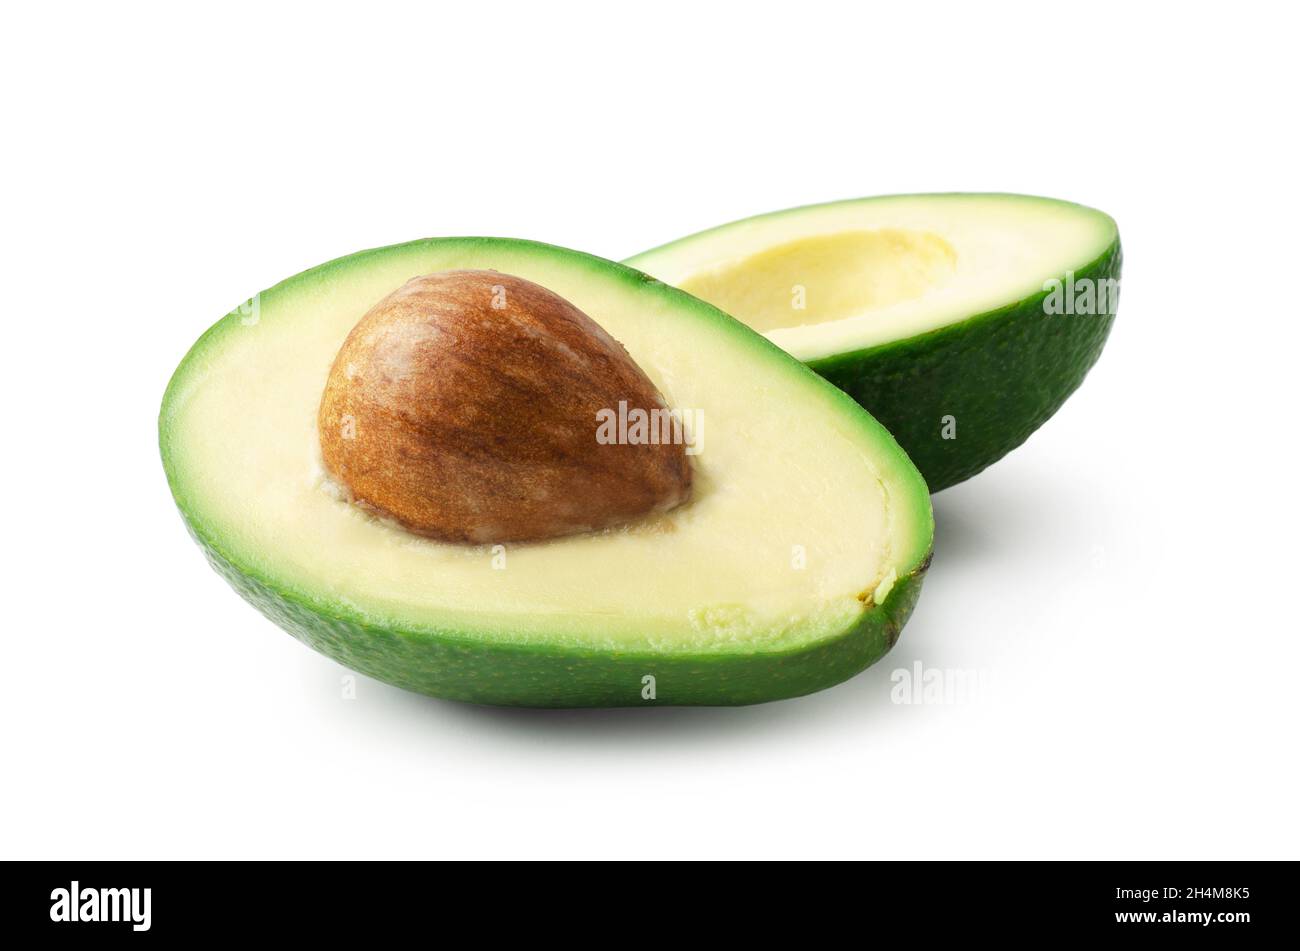 Avocado cut into halves isolated on white professional food photography Stock Photo